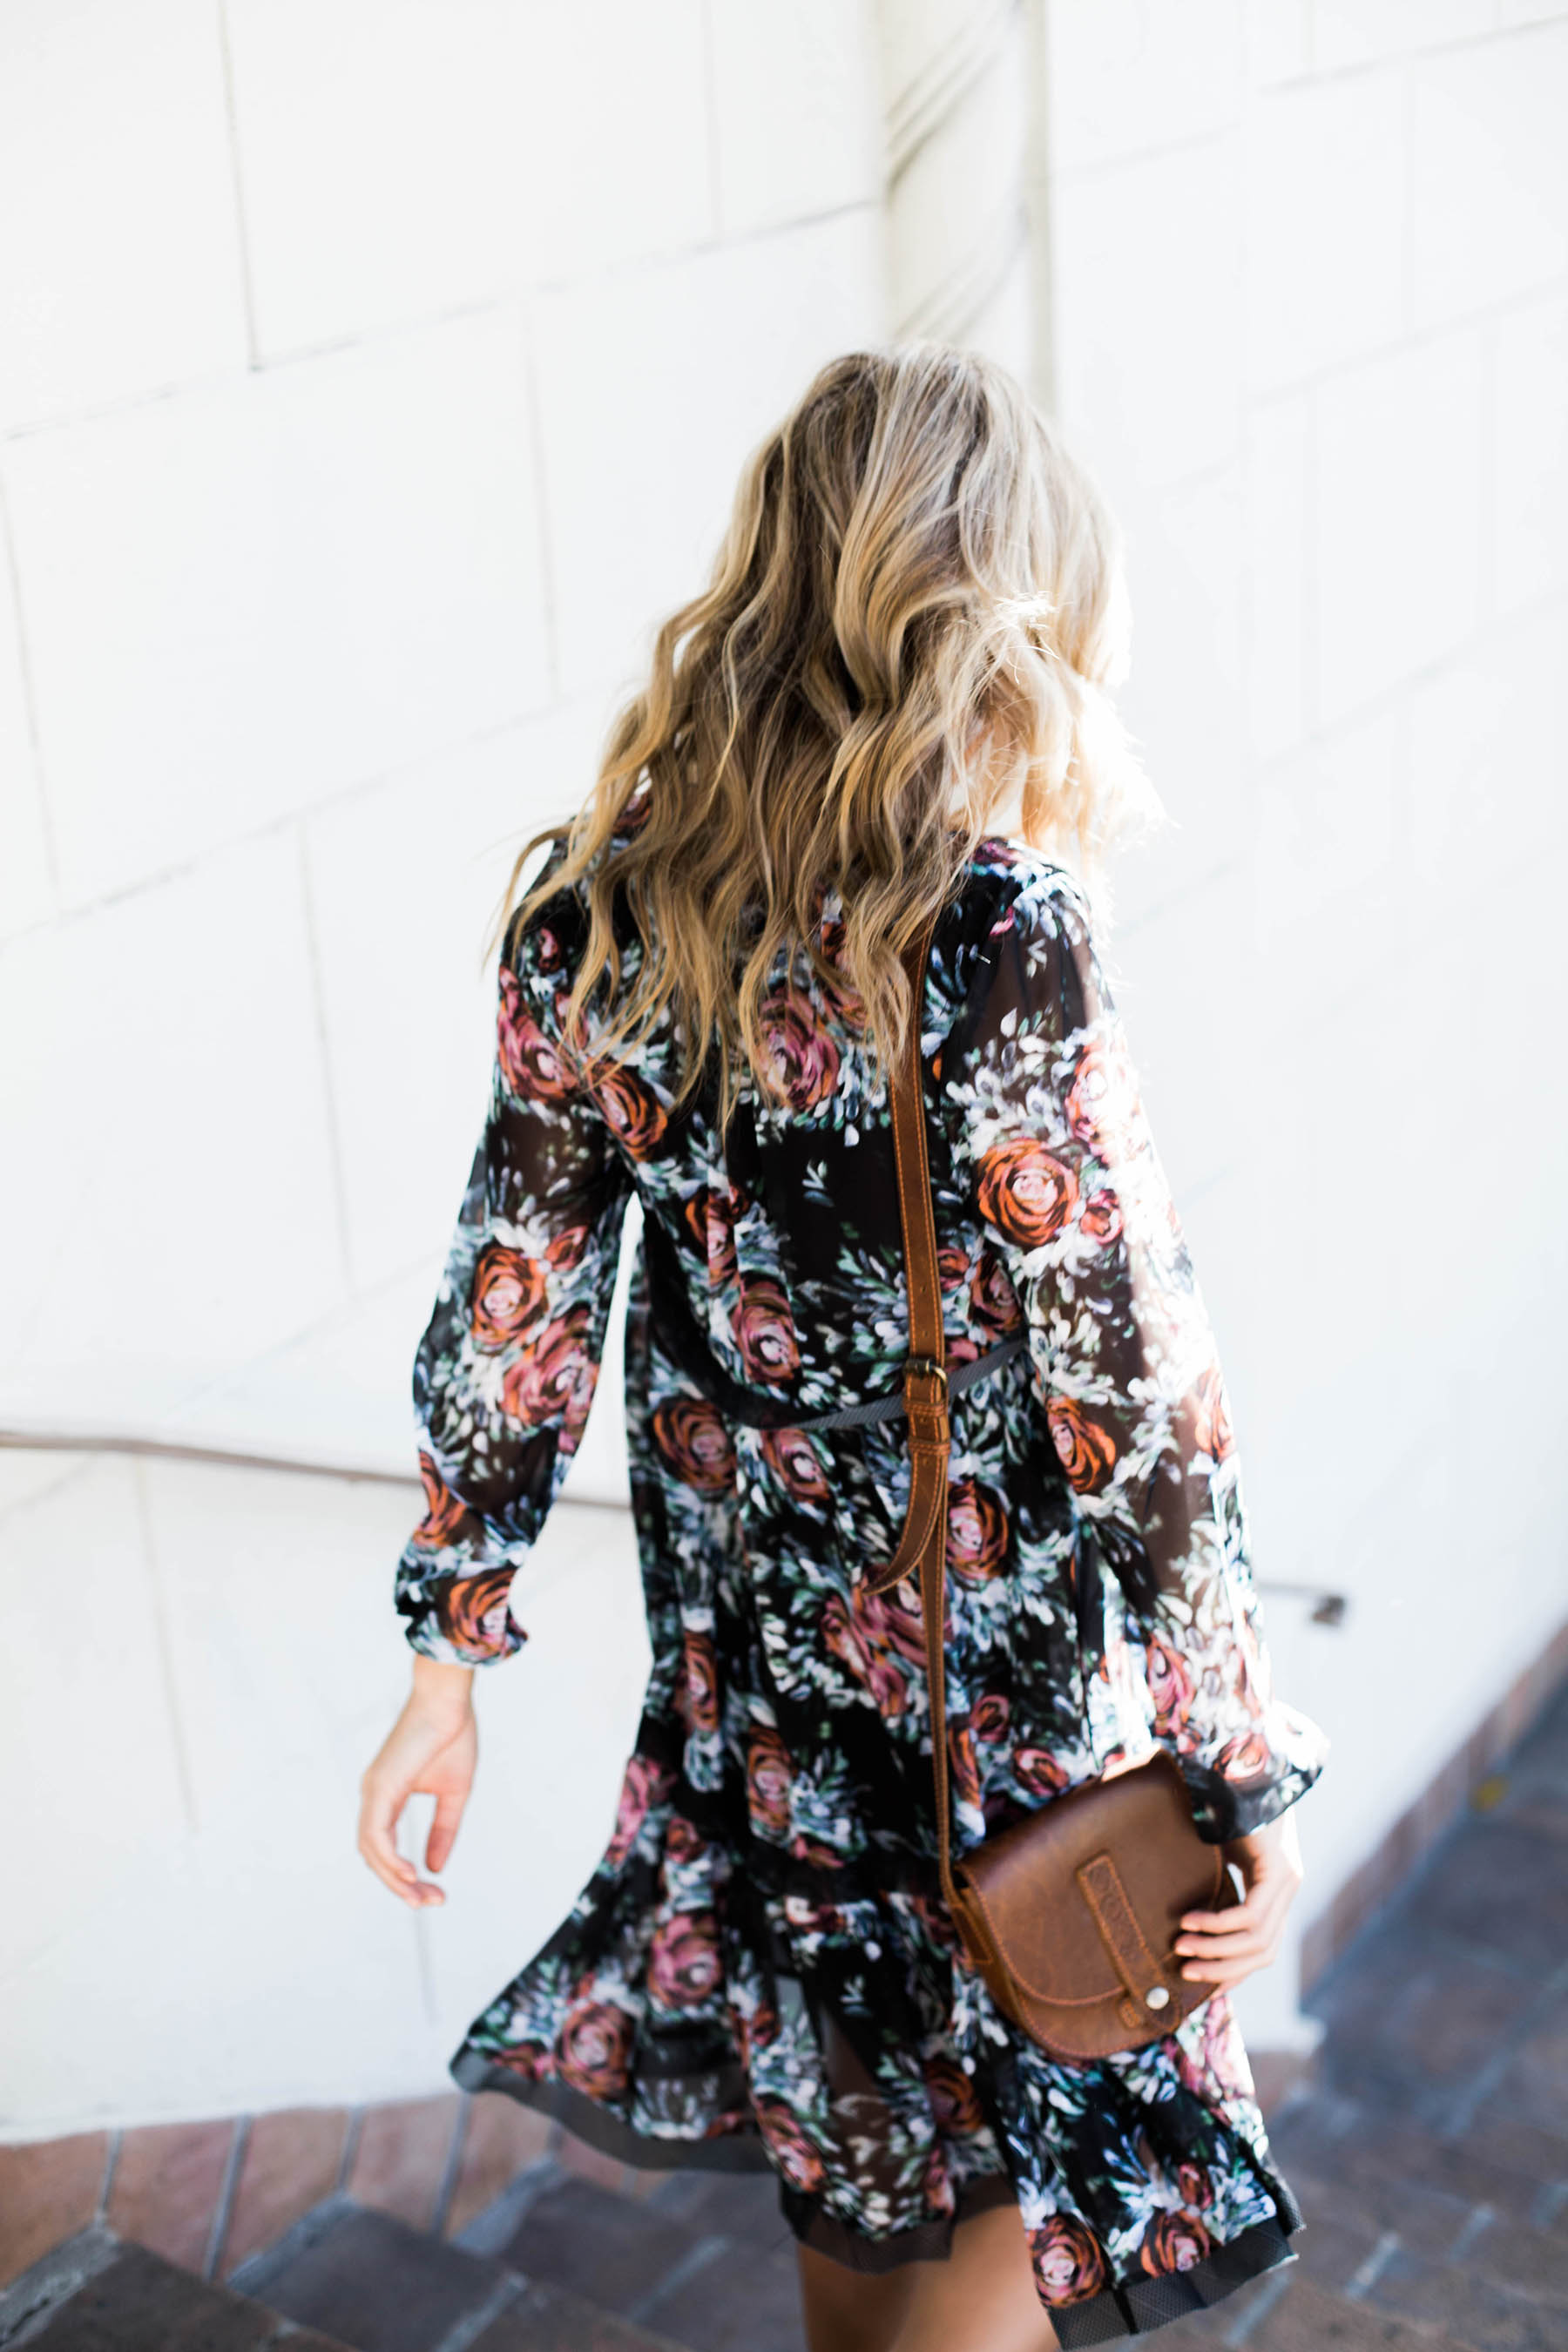 Amanda Holstein in anthropologie floral swing dress and Urban Outfitters crossbody bag